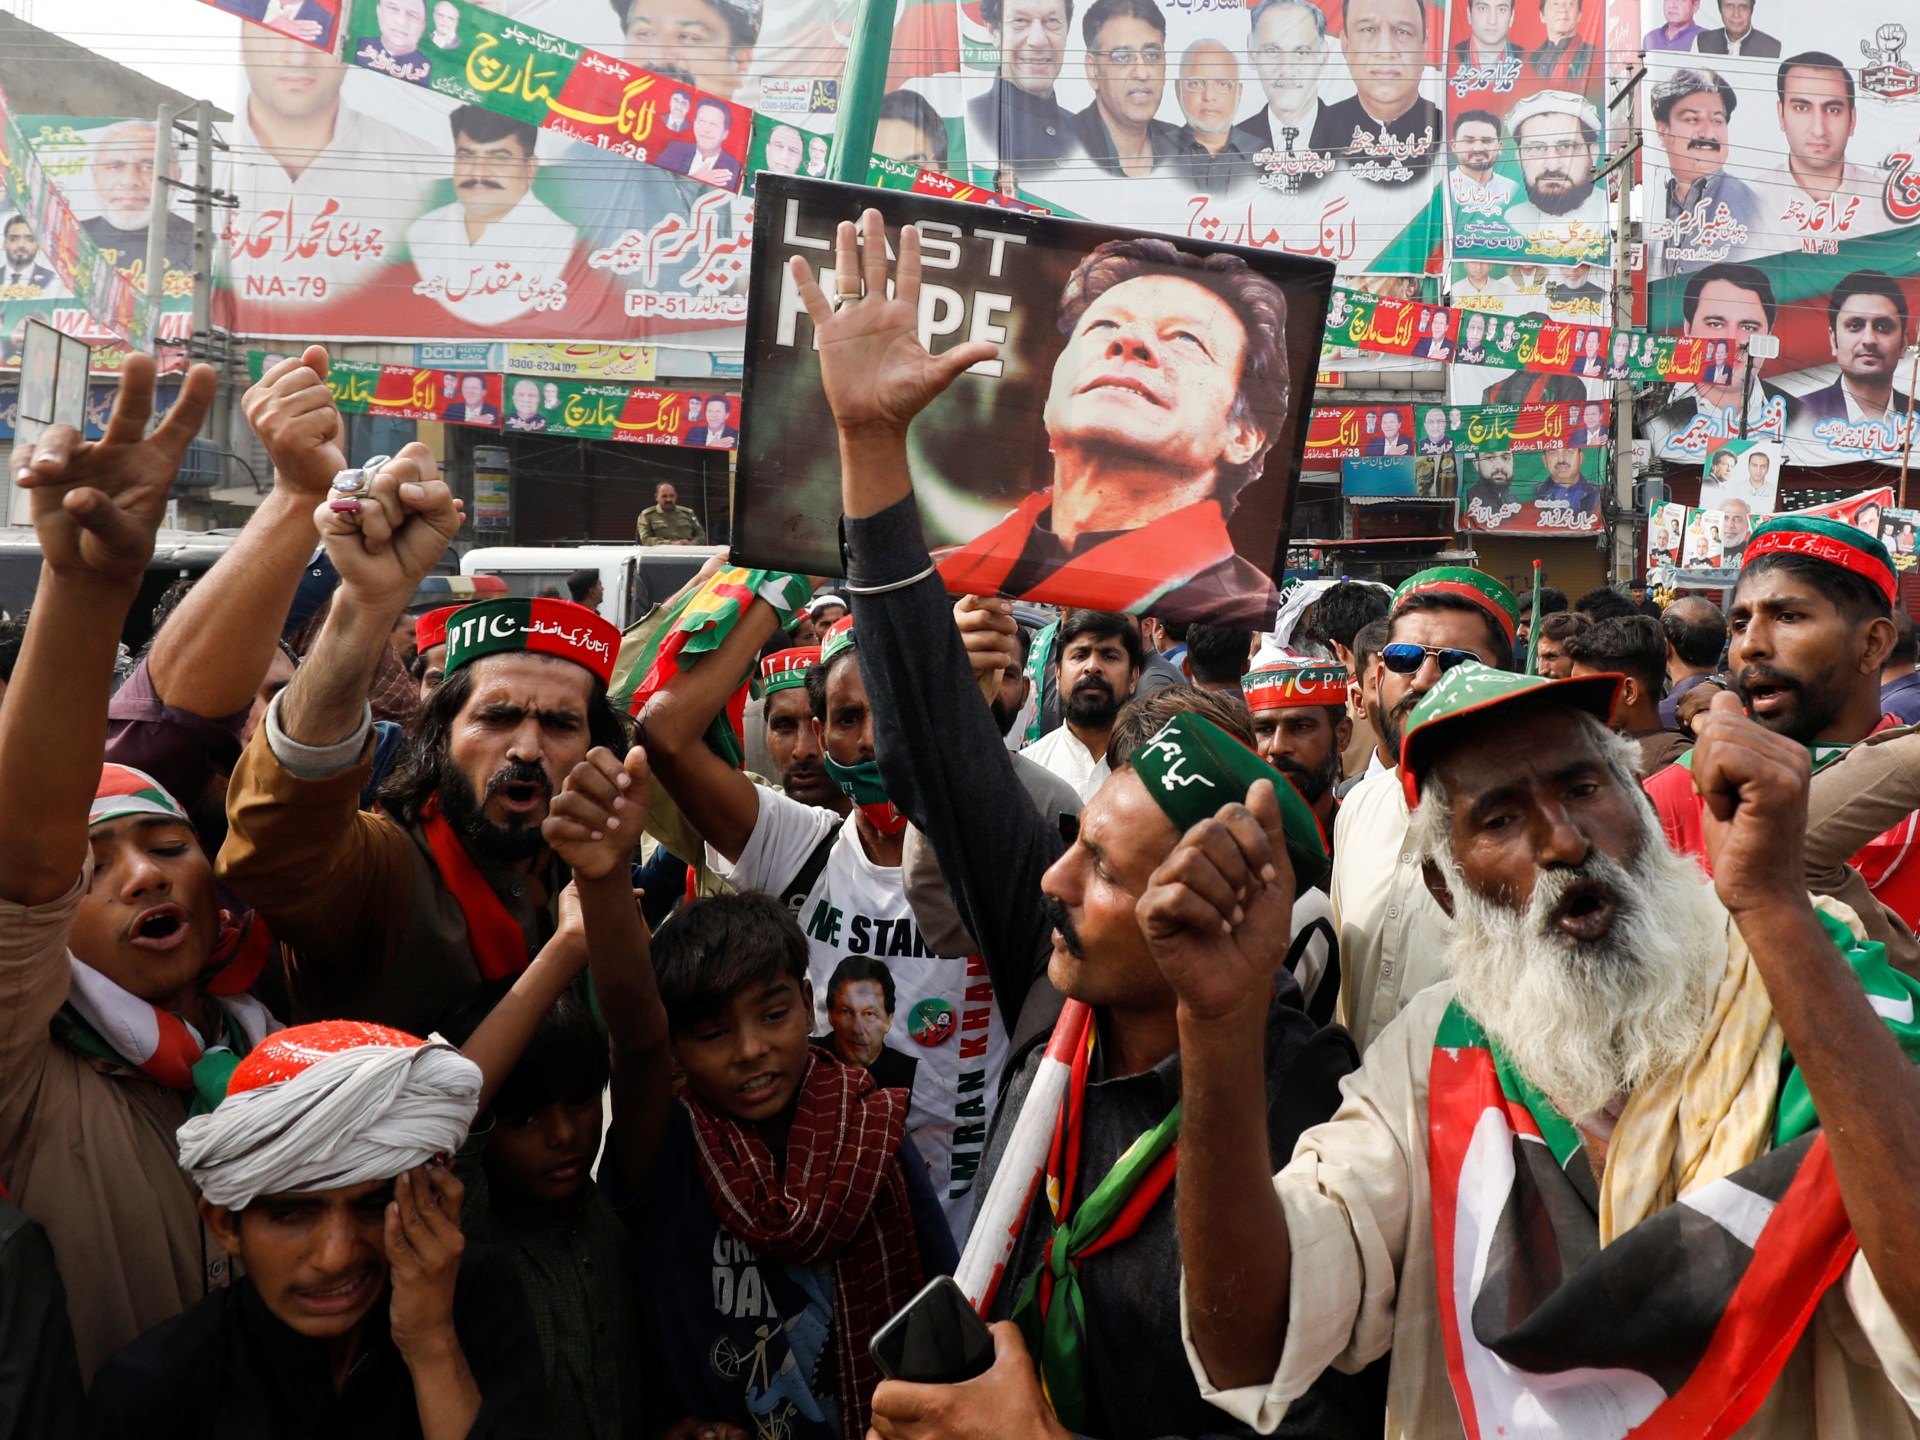 Pakistan asks former PM Khan to delay sit-in citing assault risk